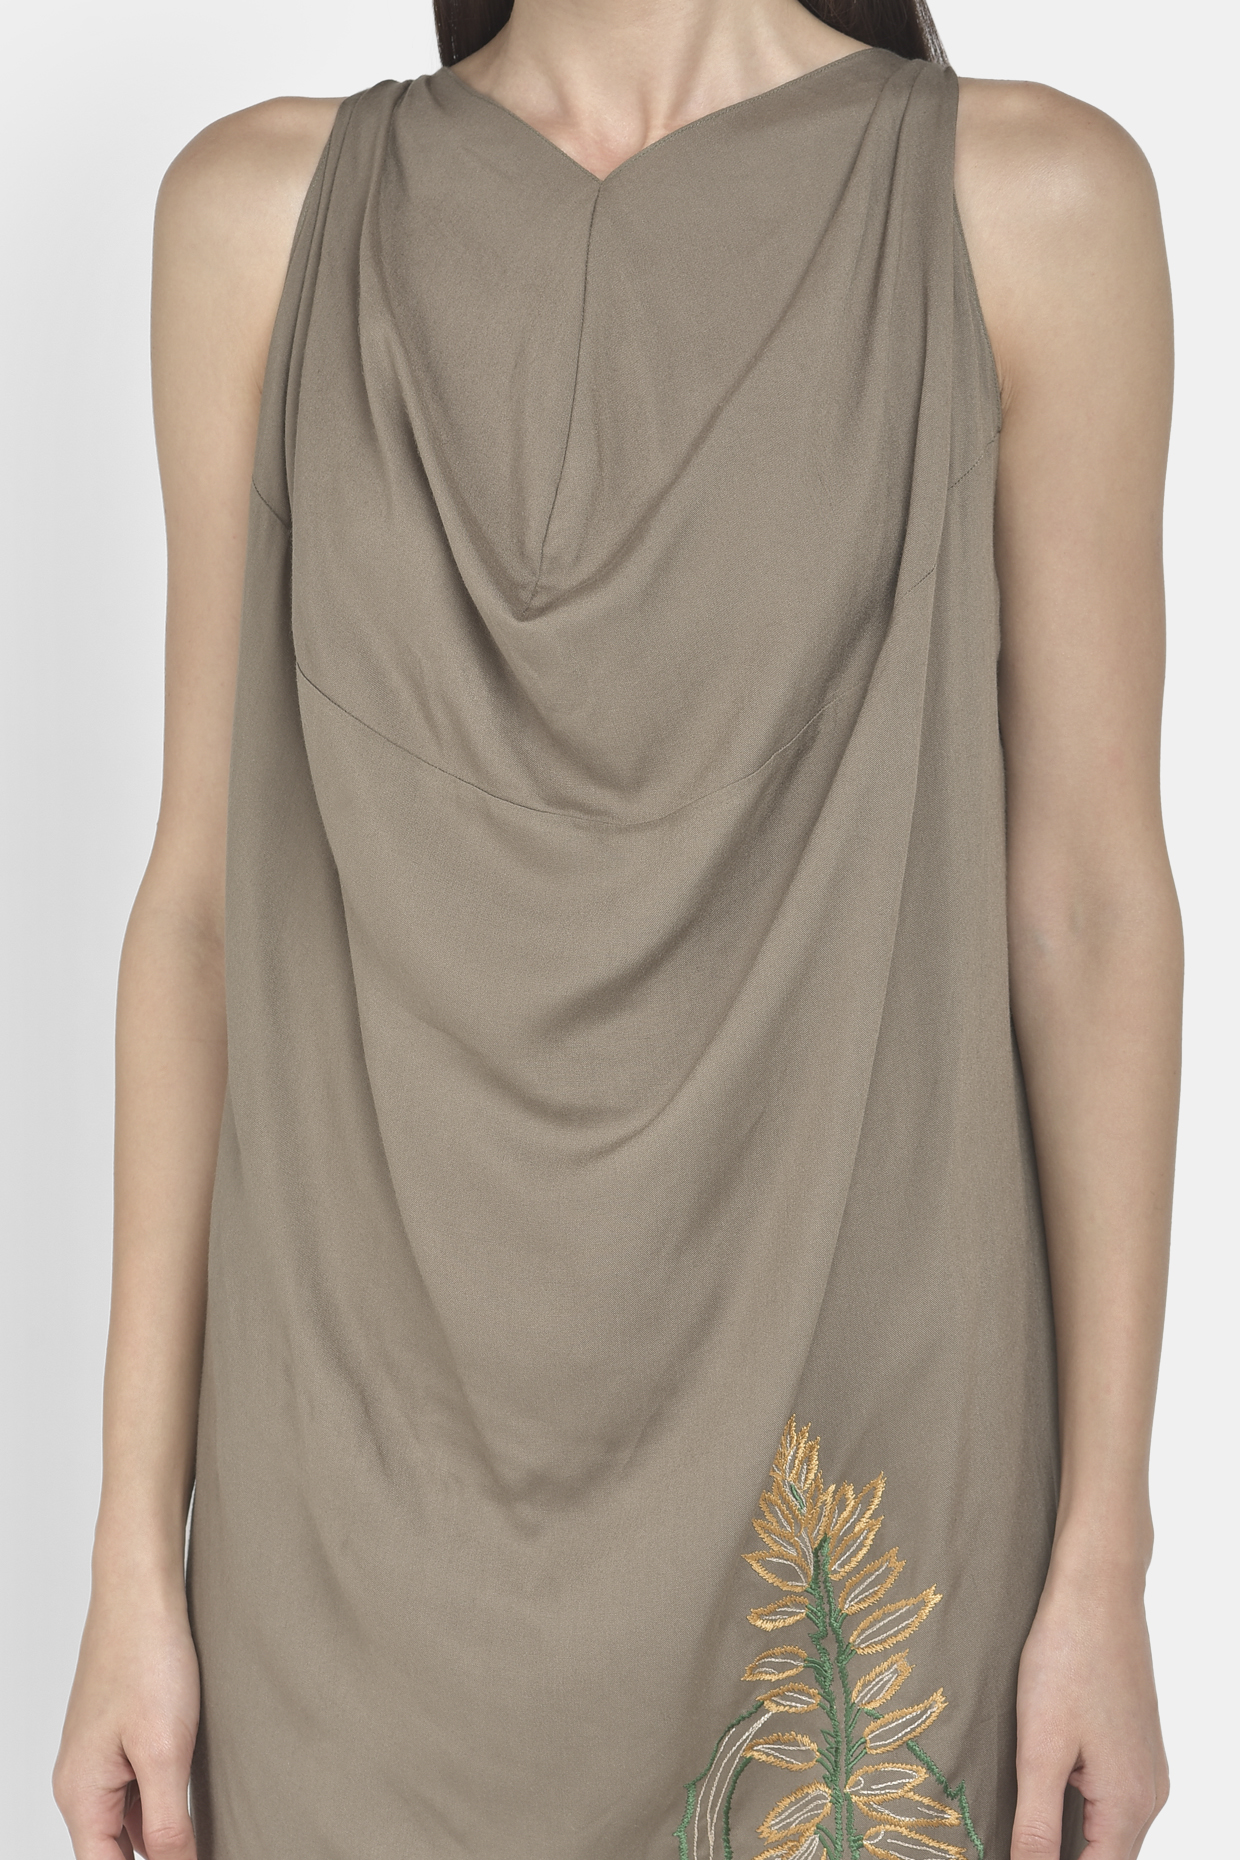 Olive Green Embroidered Draped Dress